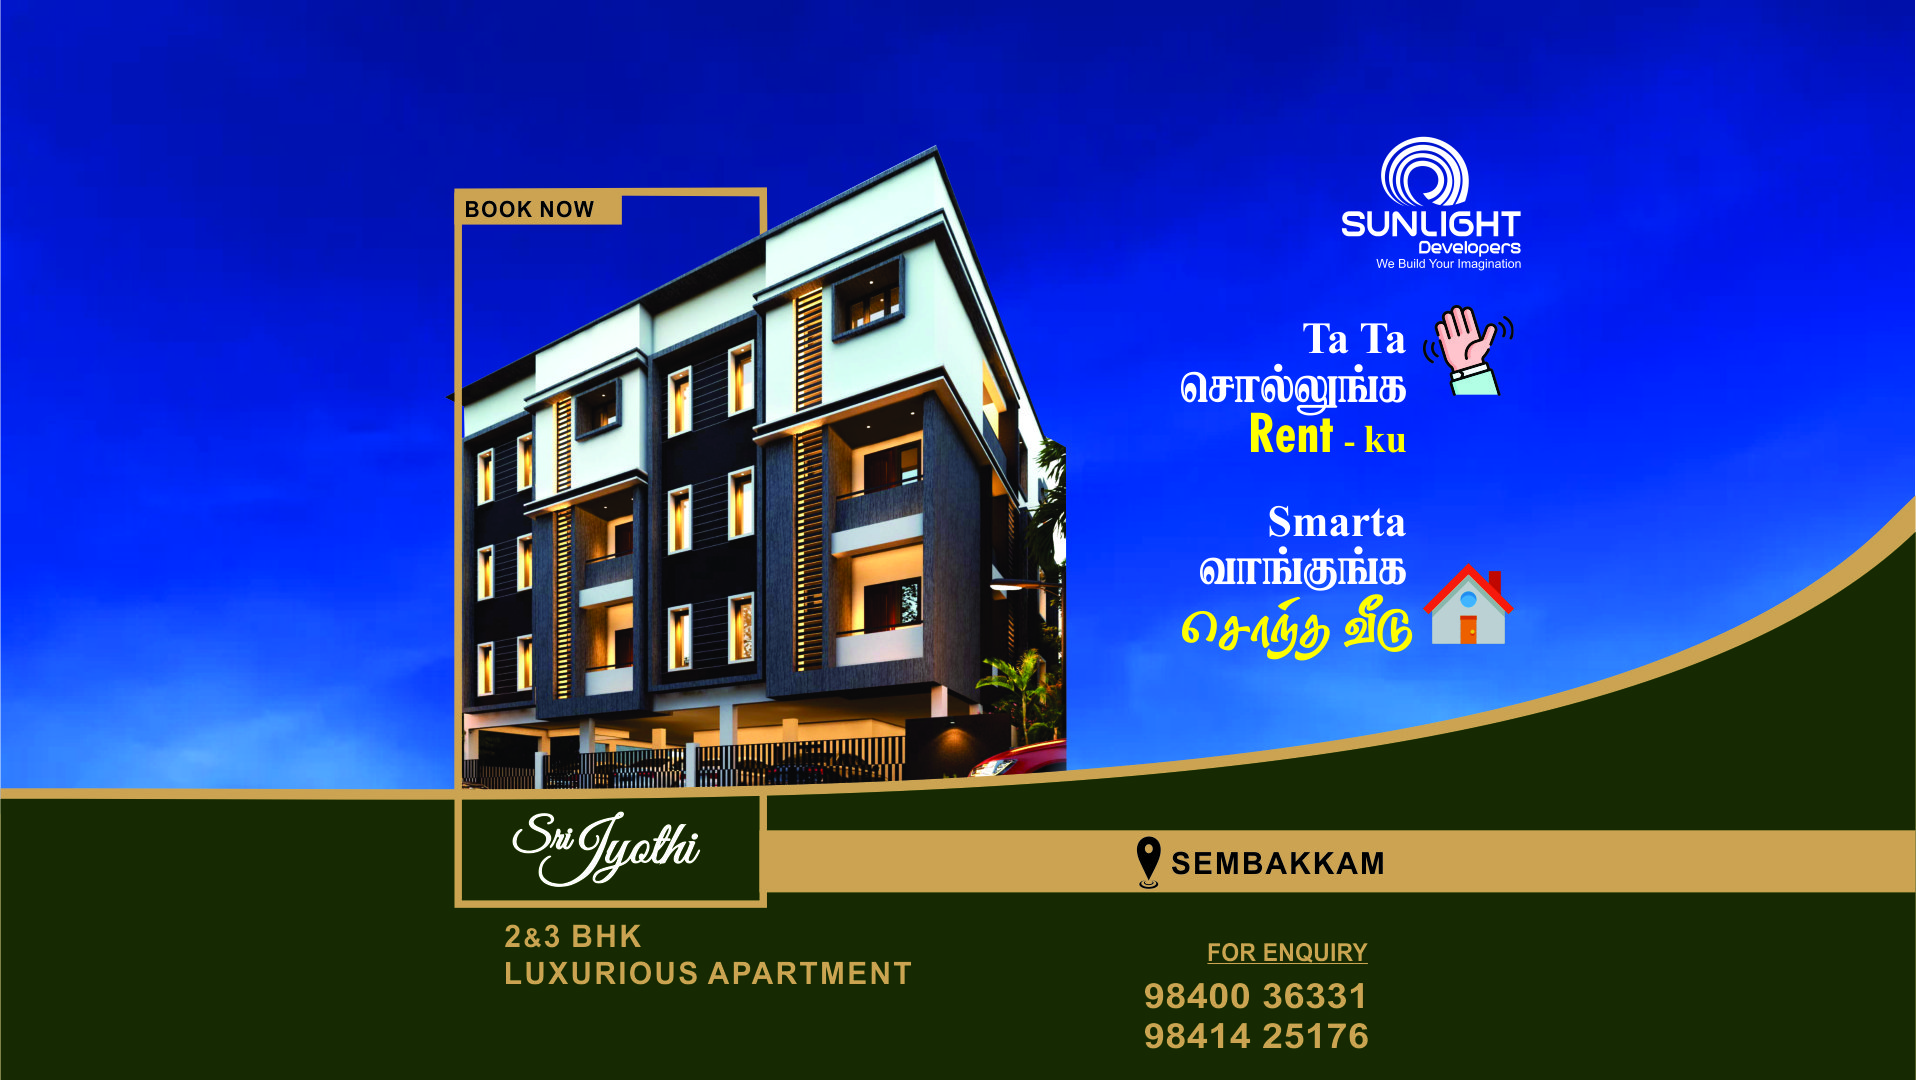 2 bhk flats for sale in Chennai from Sunlight Developer